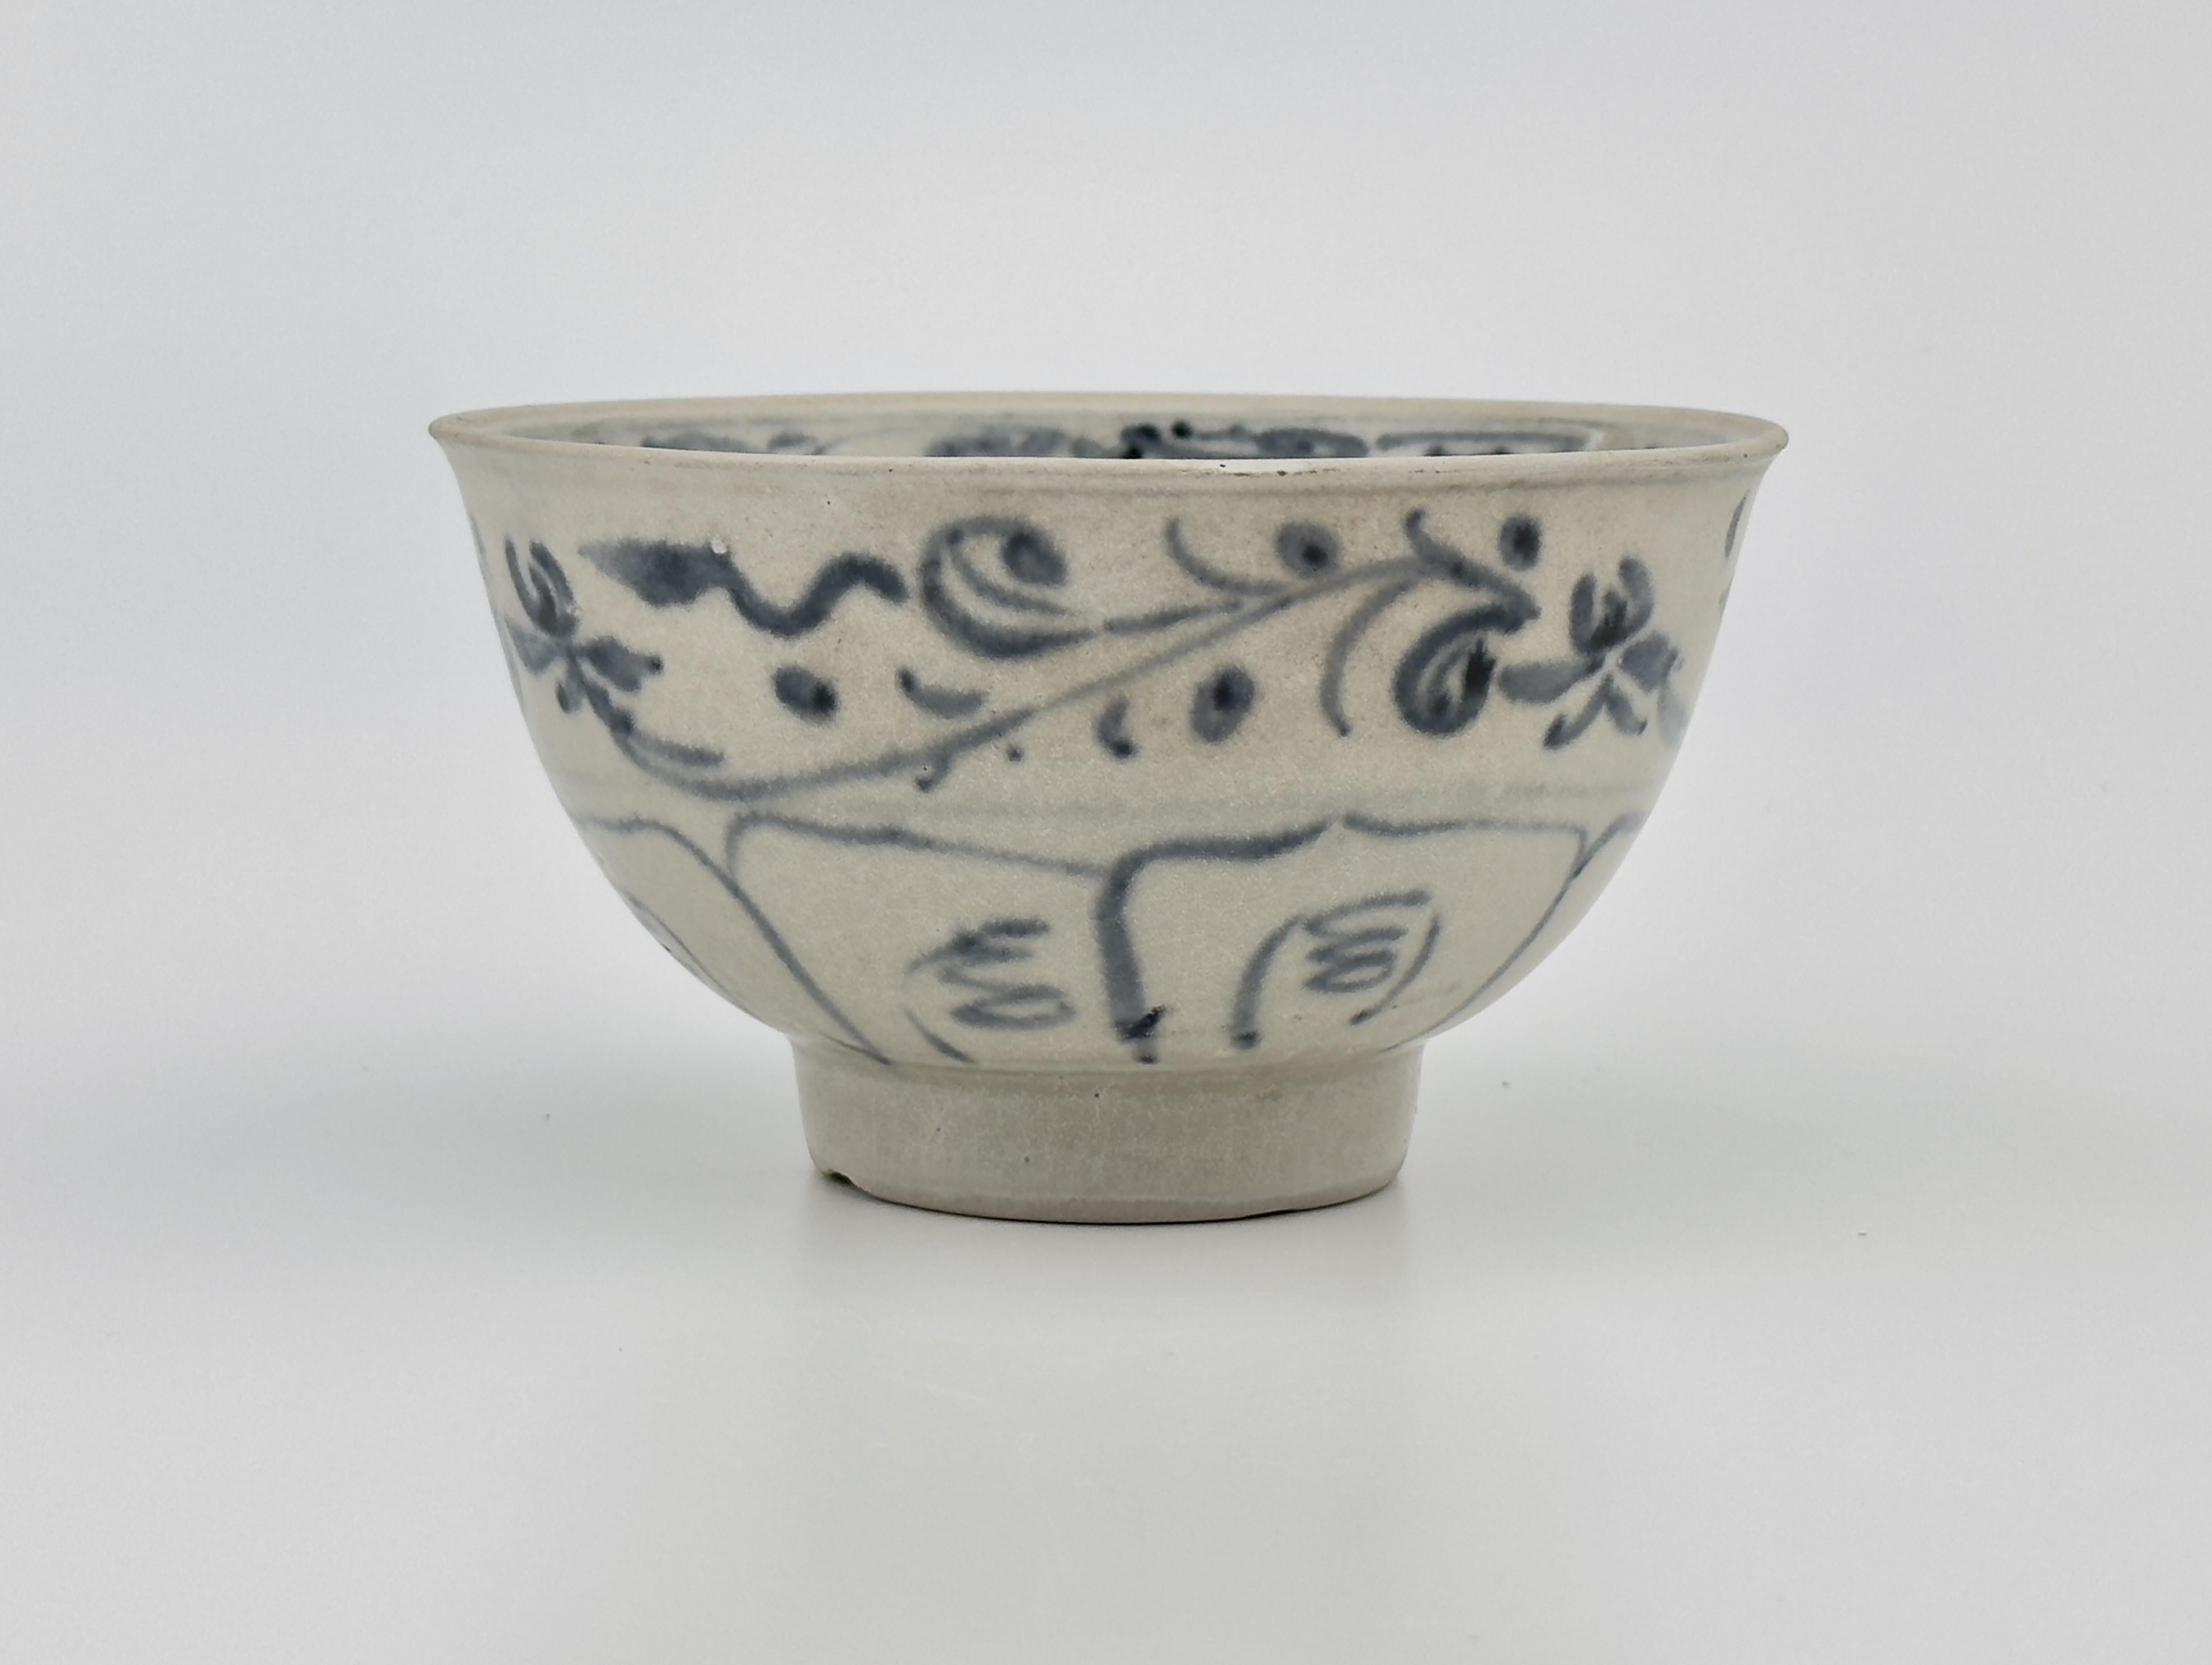 The artwork, with its foliage and floral motifs, suggests a connection to the natural world—a common theme in Vietnamese art. Such items were highly traded, and their recovery from shipwrecks helps us understand the extent of maritime commerce in